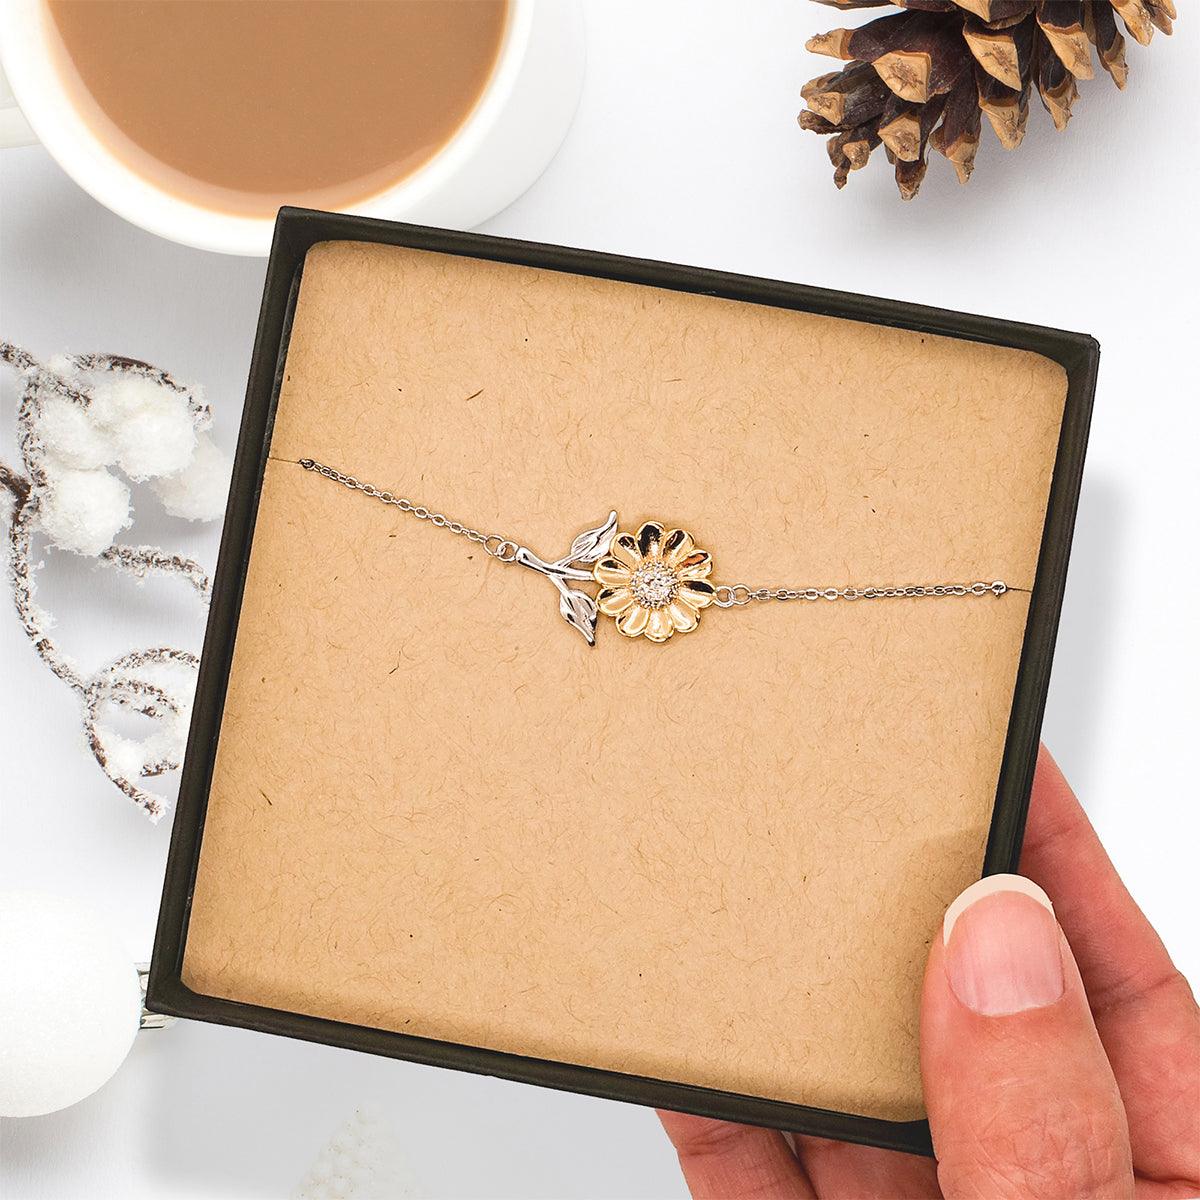 Remarkable Jeweler Gifts, Your dedication and hard work, Inspirational Birthday Christmas Unique Sunflower Bracelet For Jeweler, Coworkers, Men, Women, Friends - Mallard Moon Gift Shop